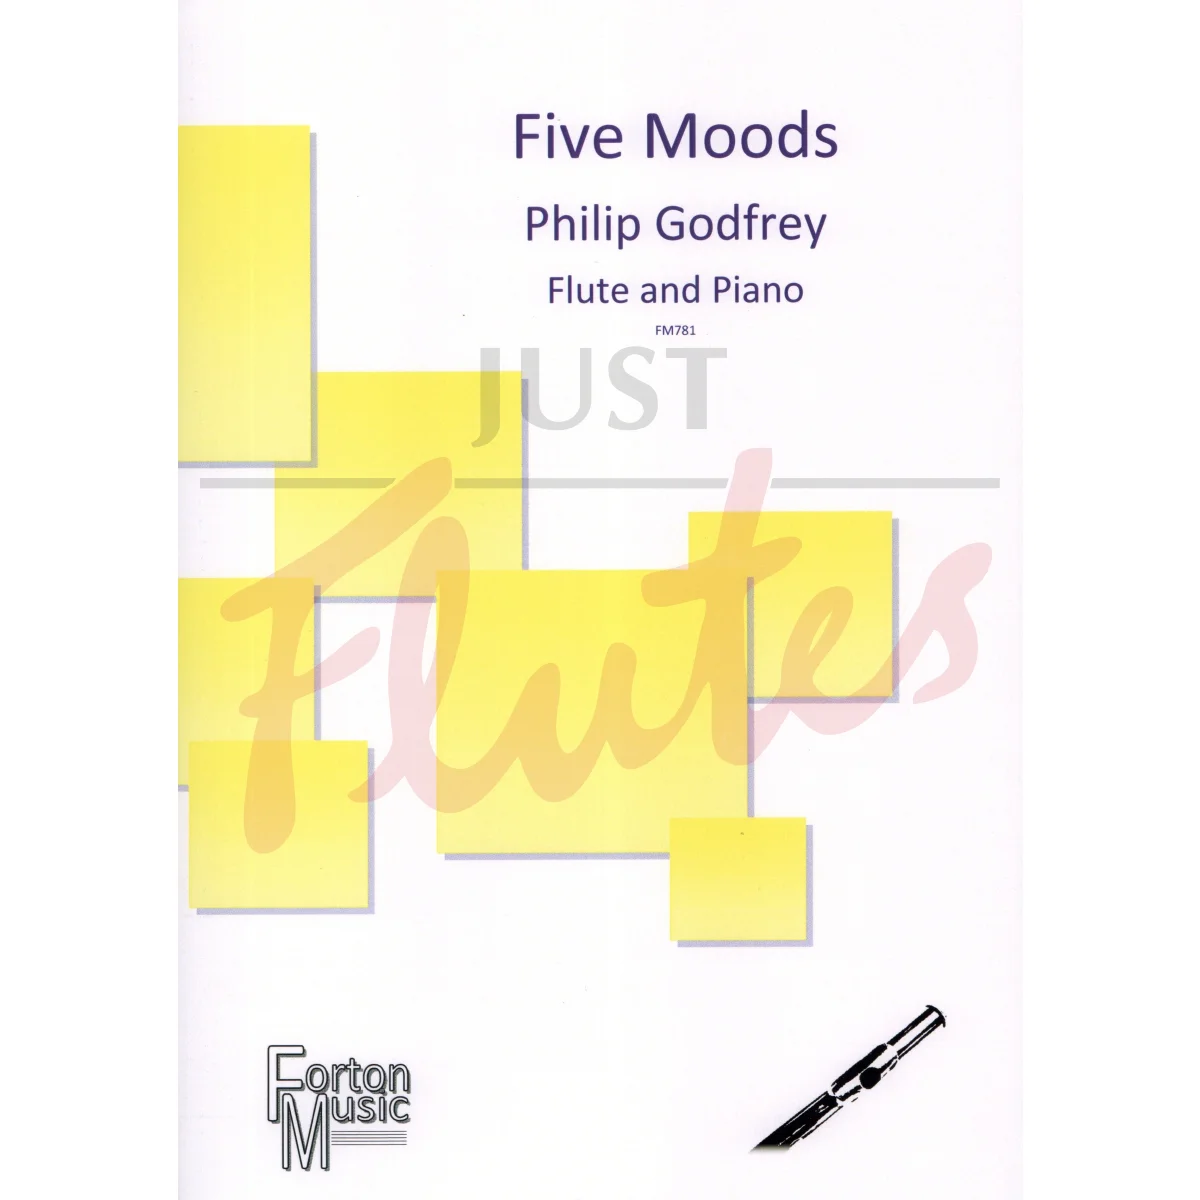 Five Moods for Flute and Piano